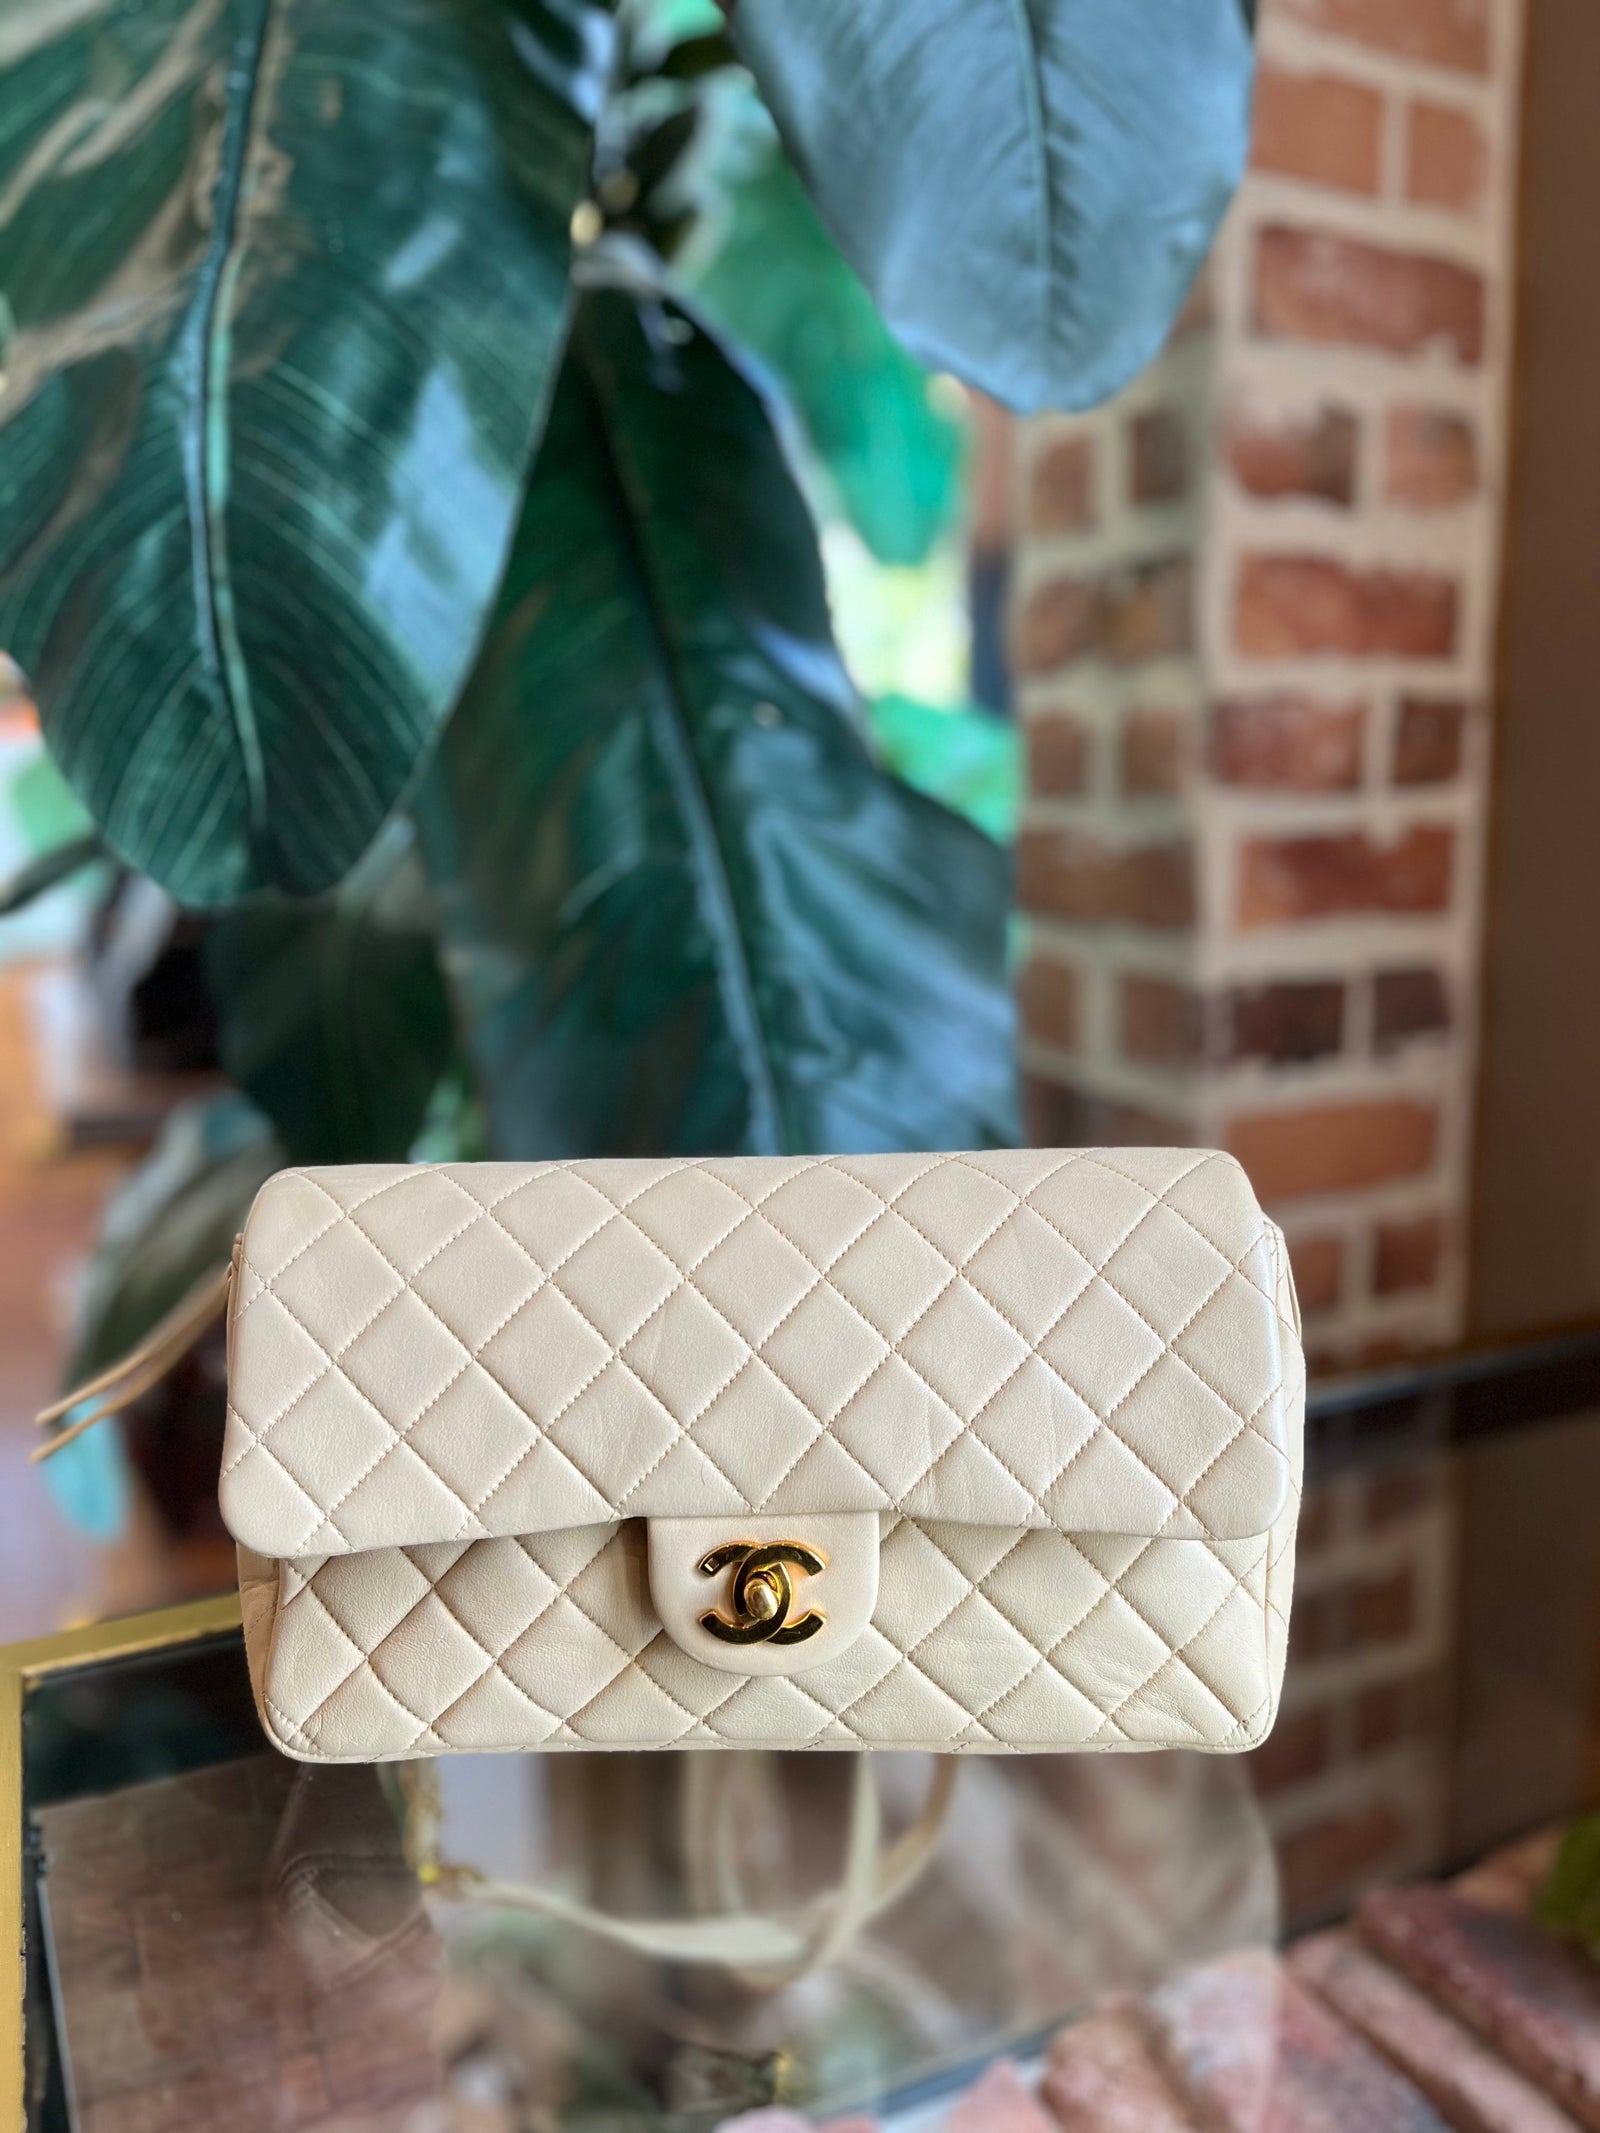 CHANEL Caviar Quilted Medium French Riviera Flap Beige 1021435